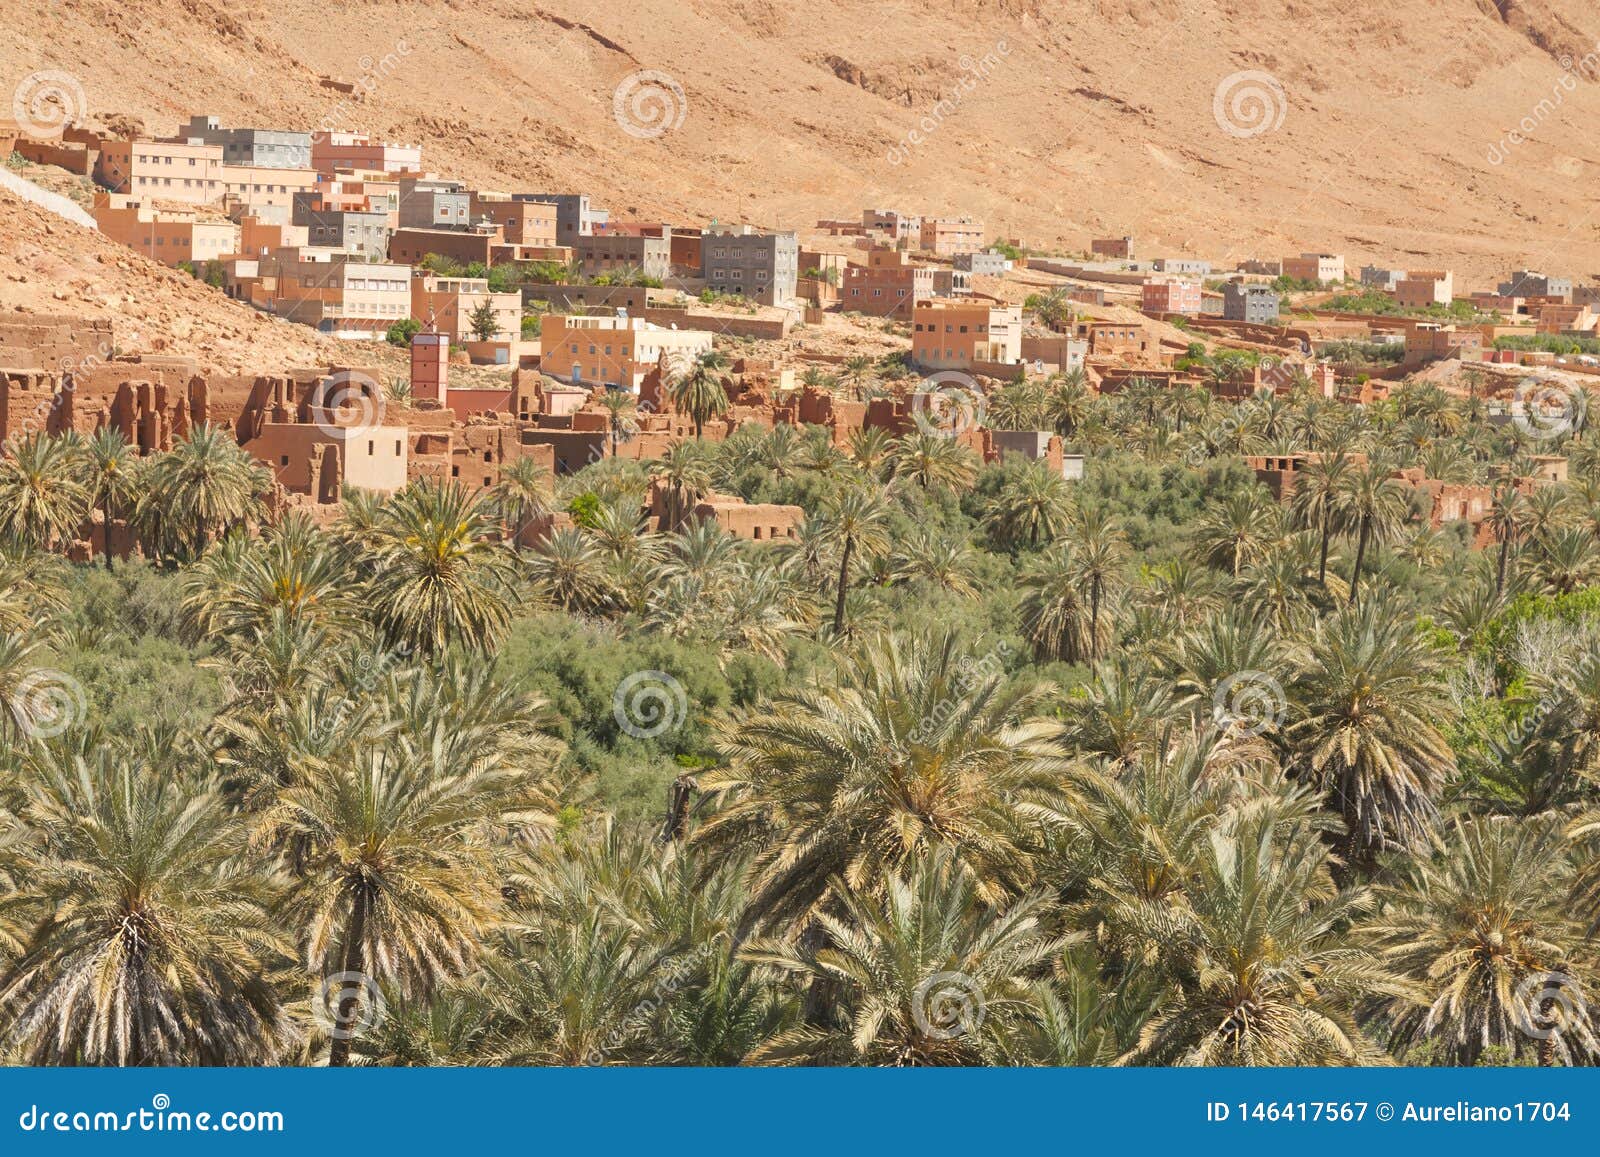 Morocco Ait Ijjou By Tinghir Oasis Date Palm Orchard Mountains